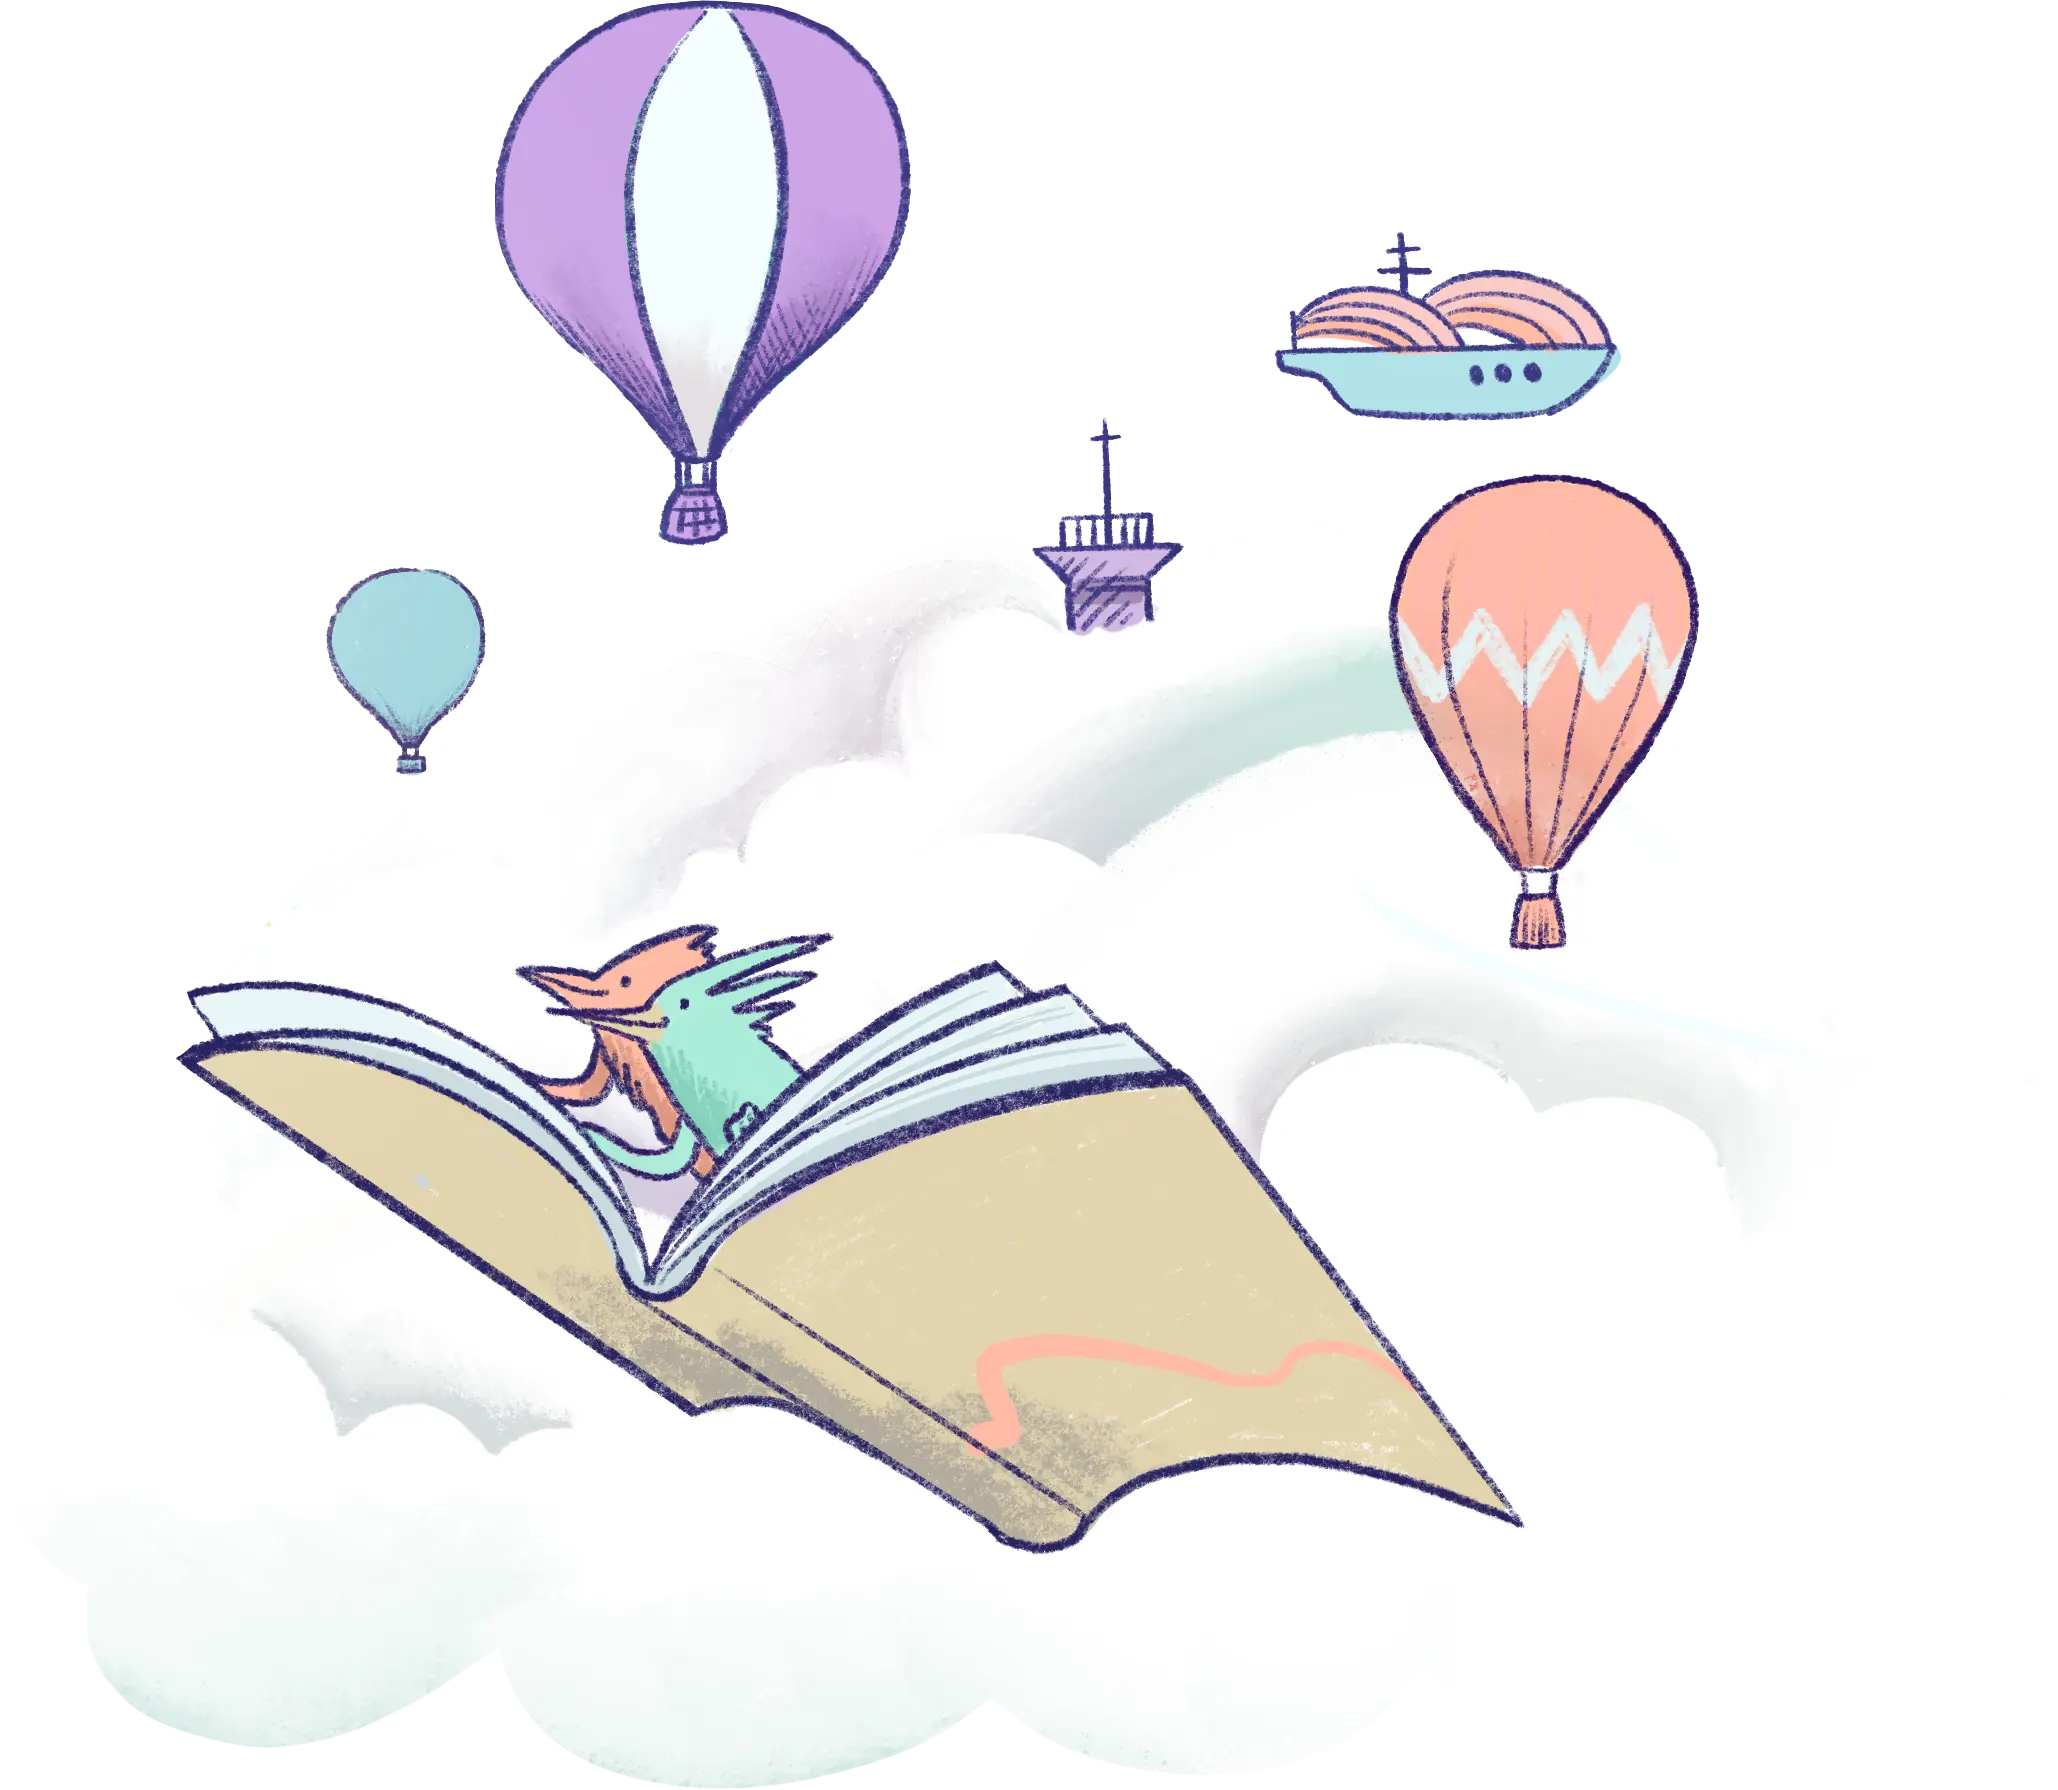 An illustration of a couple of birds in an open book, flying in the clouds, surrounded by hot air balloons.